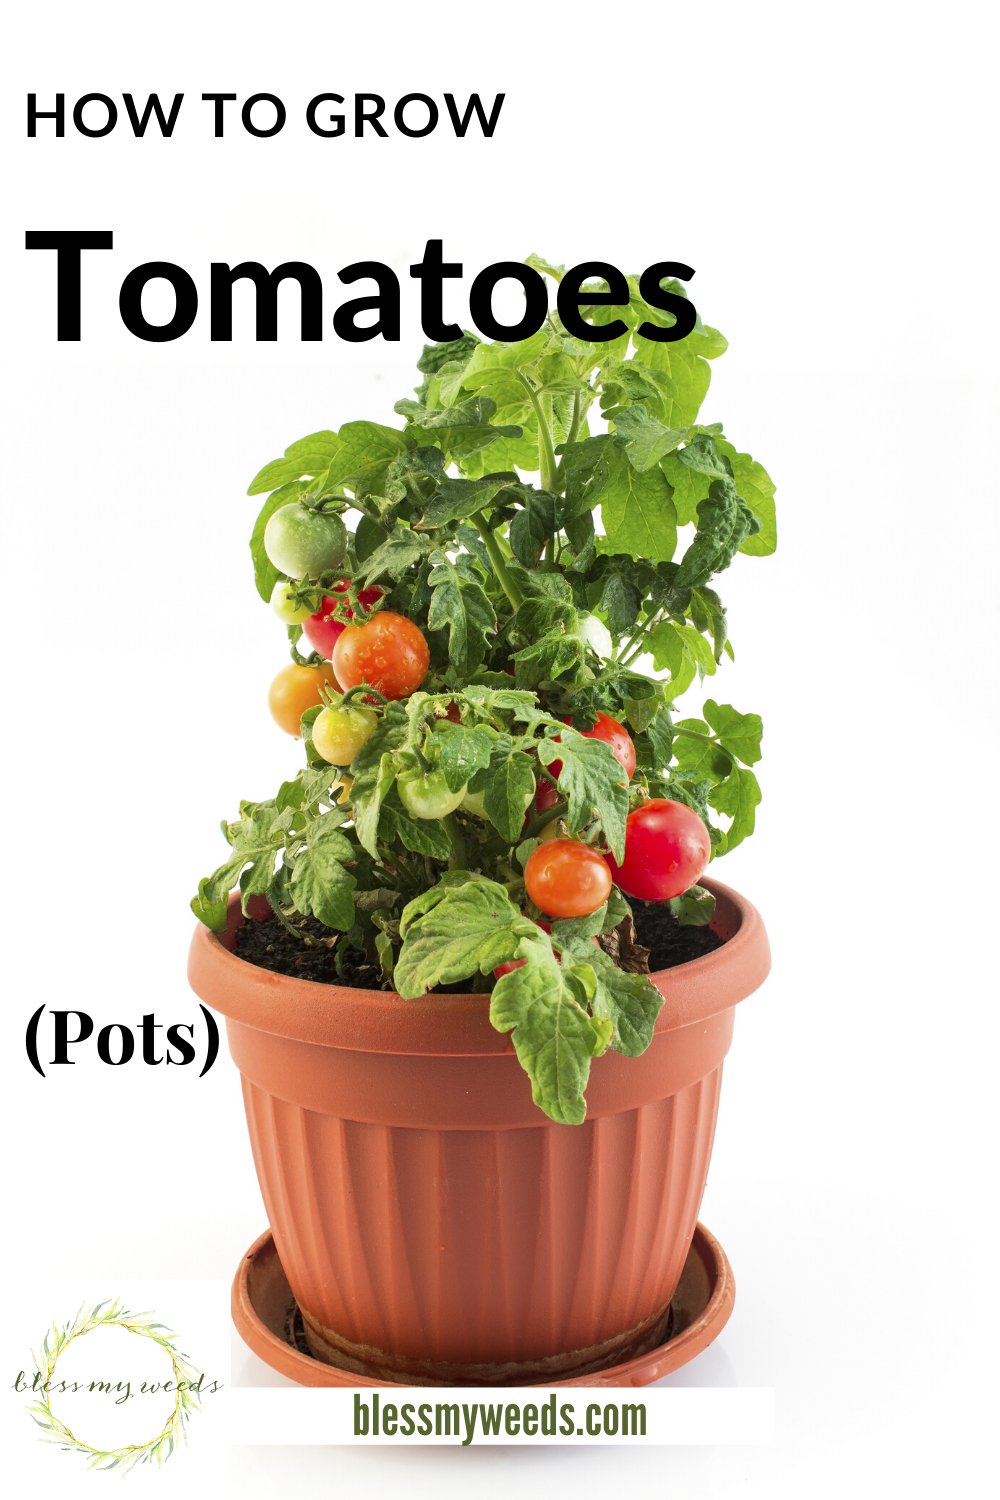 I love tomatoes! But I know how easily they can be damaged by cold temps at night. So, now I grow them in containers. At night, I move them into the garage where they won't freeze. I love having them out on the patio during the day. It's fun to watch them grow! I've got lots of tips to share with you to ensure you can be successful in growing tomatoes in containers. Container gardening changes everything for tomatoes! #blessmyweedsblogpost #tomatoesincontainers #containergardingtips